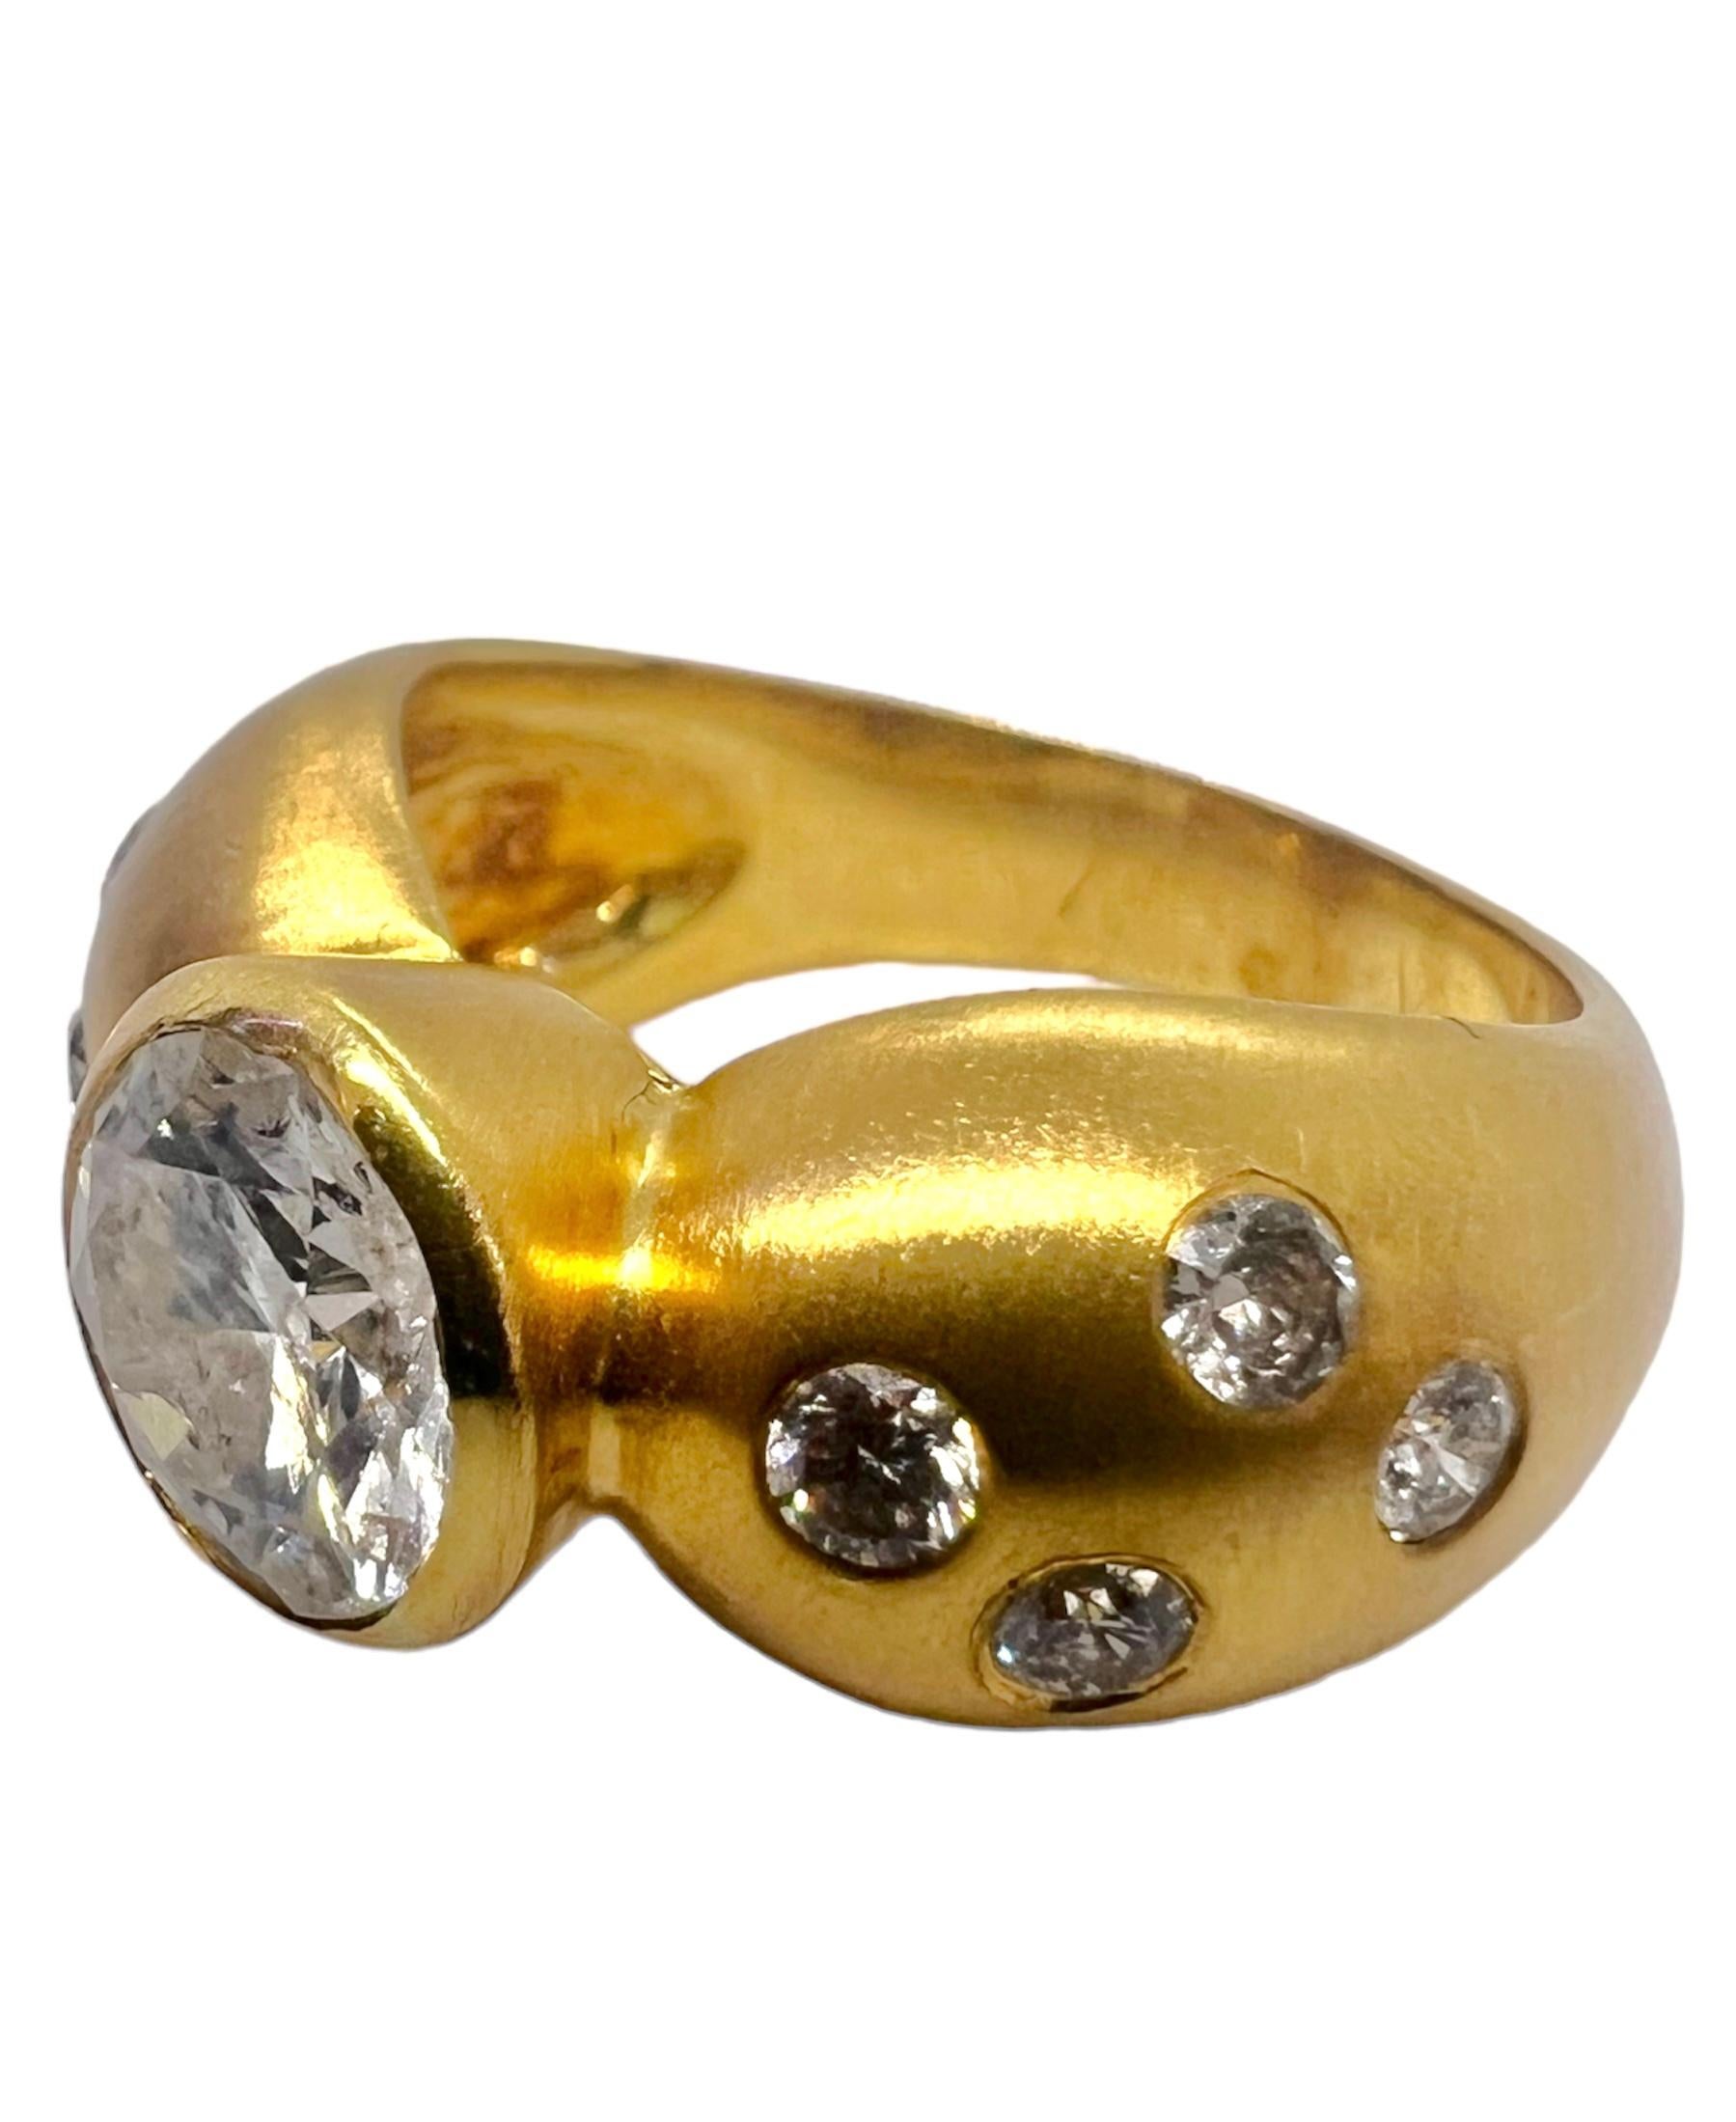 18K yellow gold ring with round center cut diamond accentuated with small round diamonds.

Sophia D by Joseph Dardashti LTD has been known worldwide for 35 years and are inspired by classic Art Deco design that merges with modern manufacturing